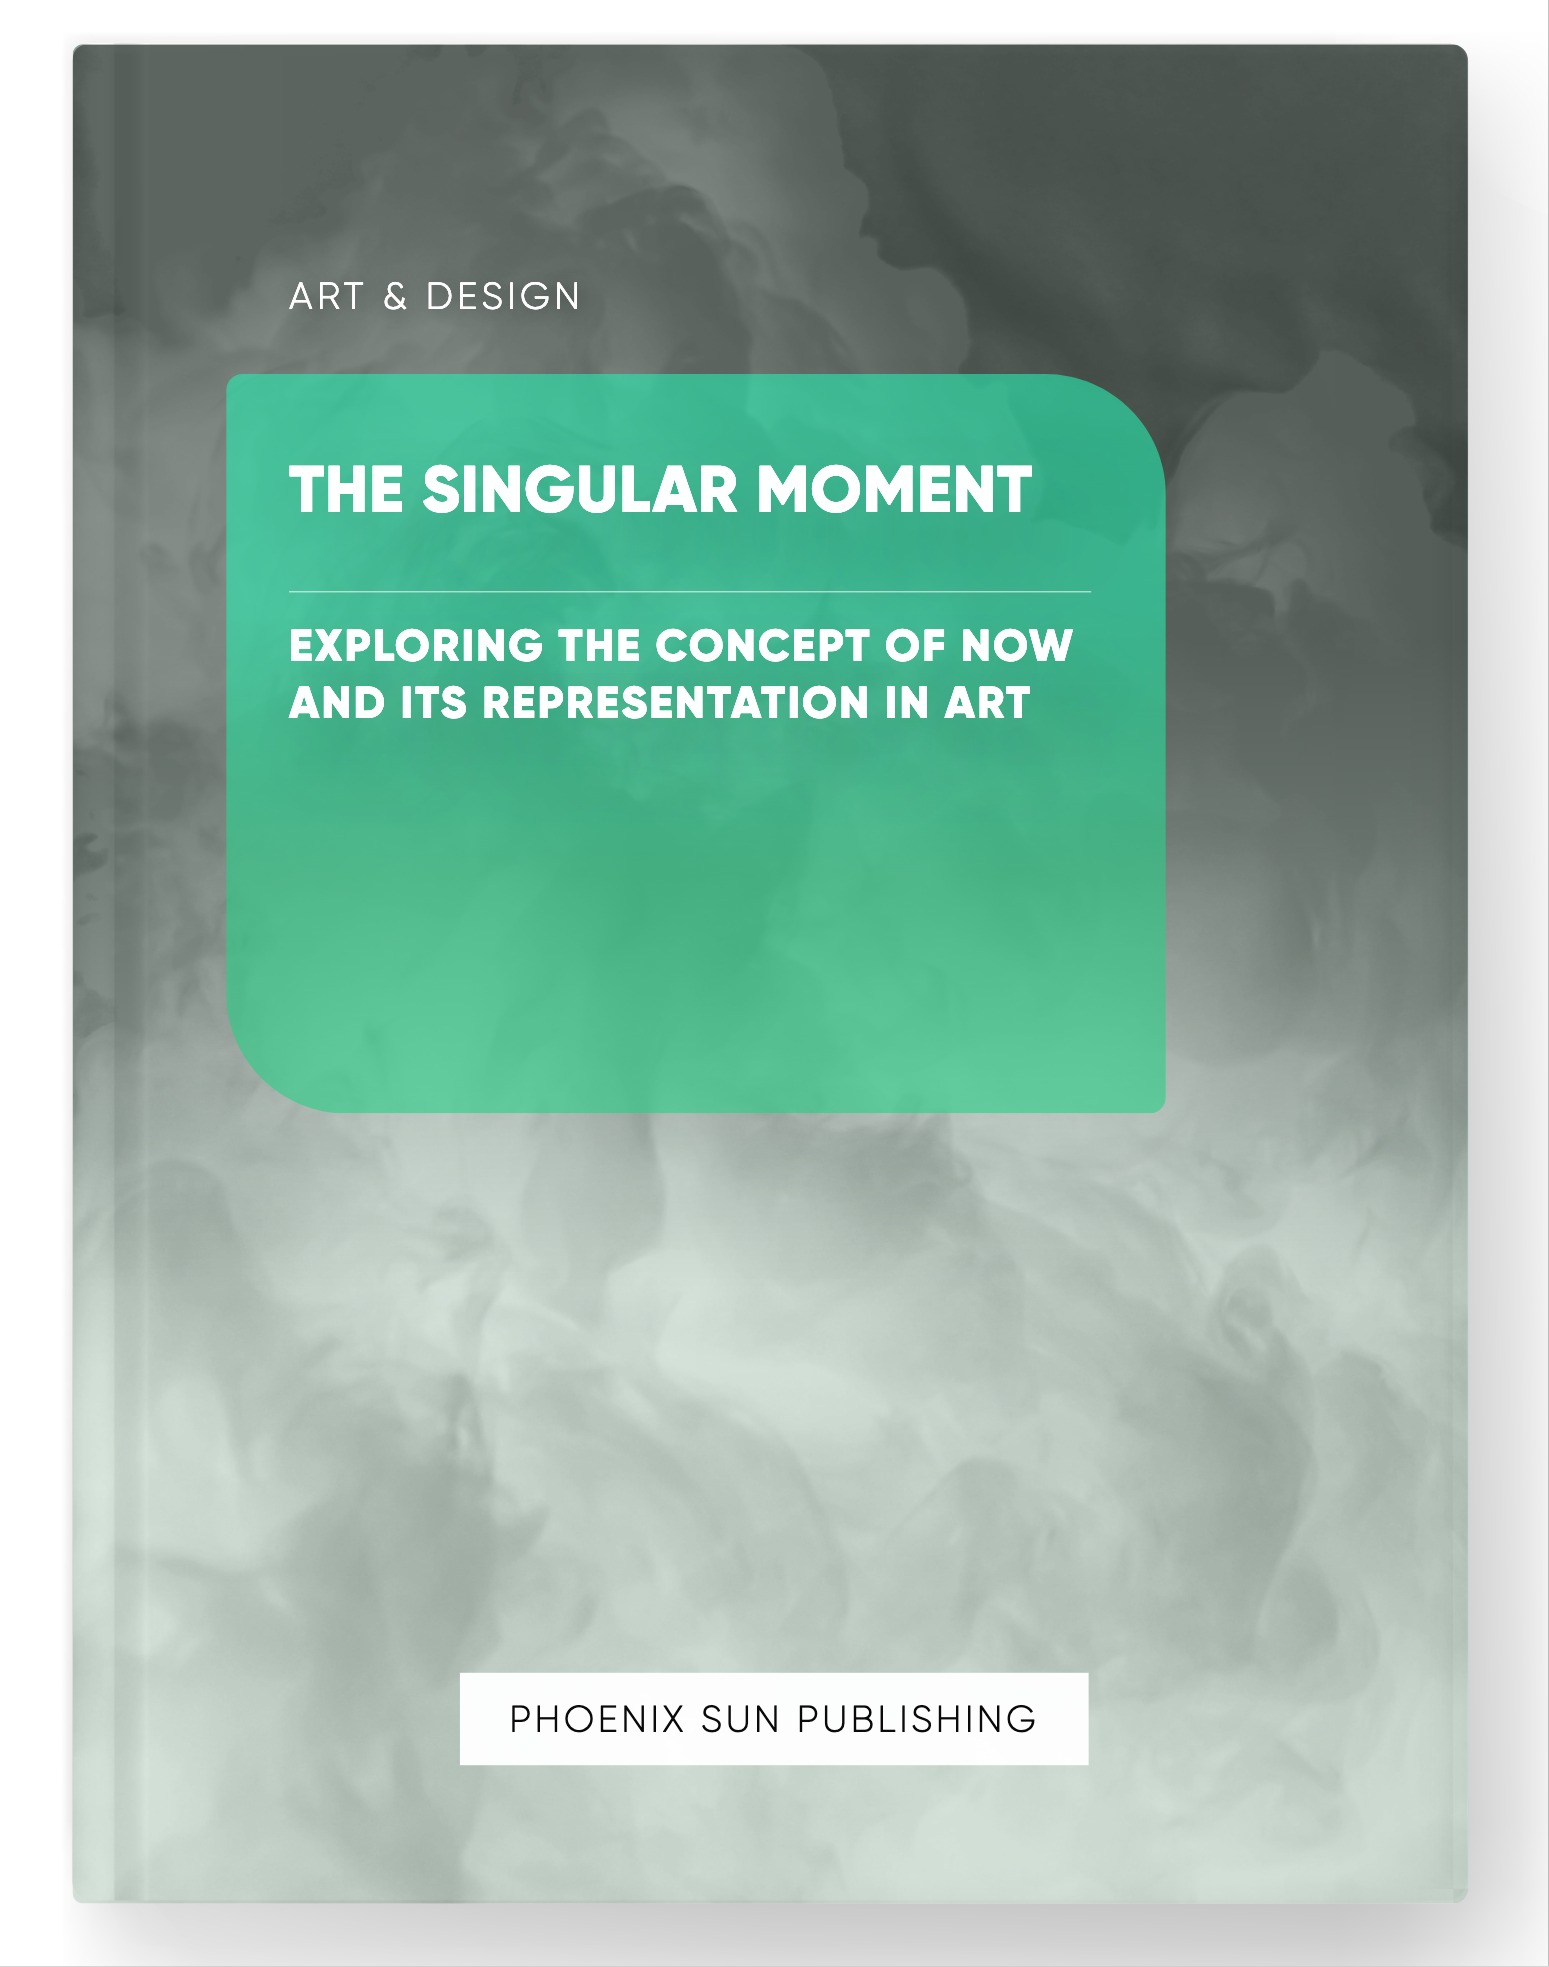 The Singular Moment – Exploring the Concept of Now and its Representation in Art